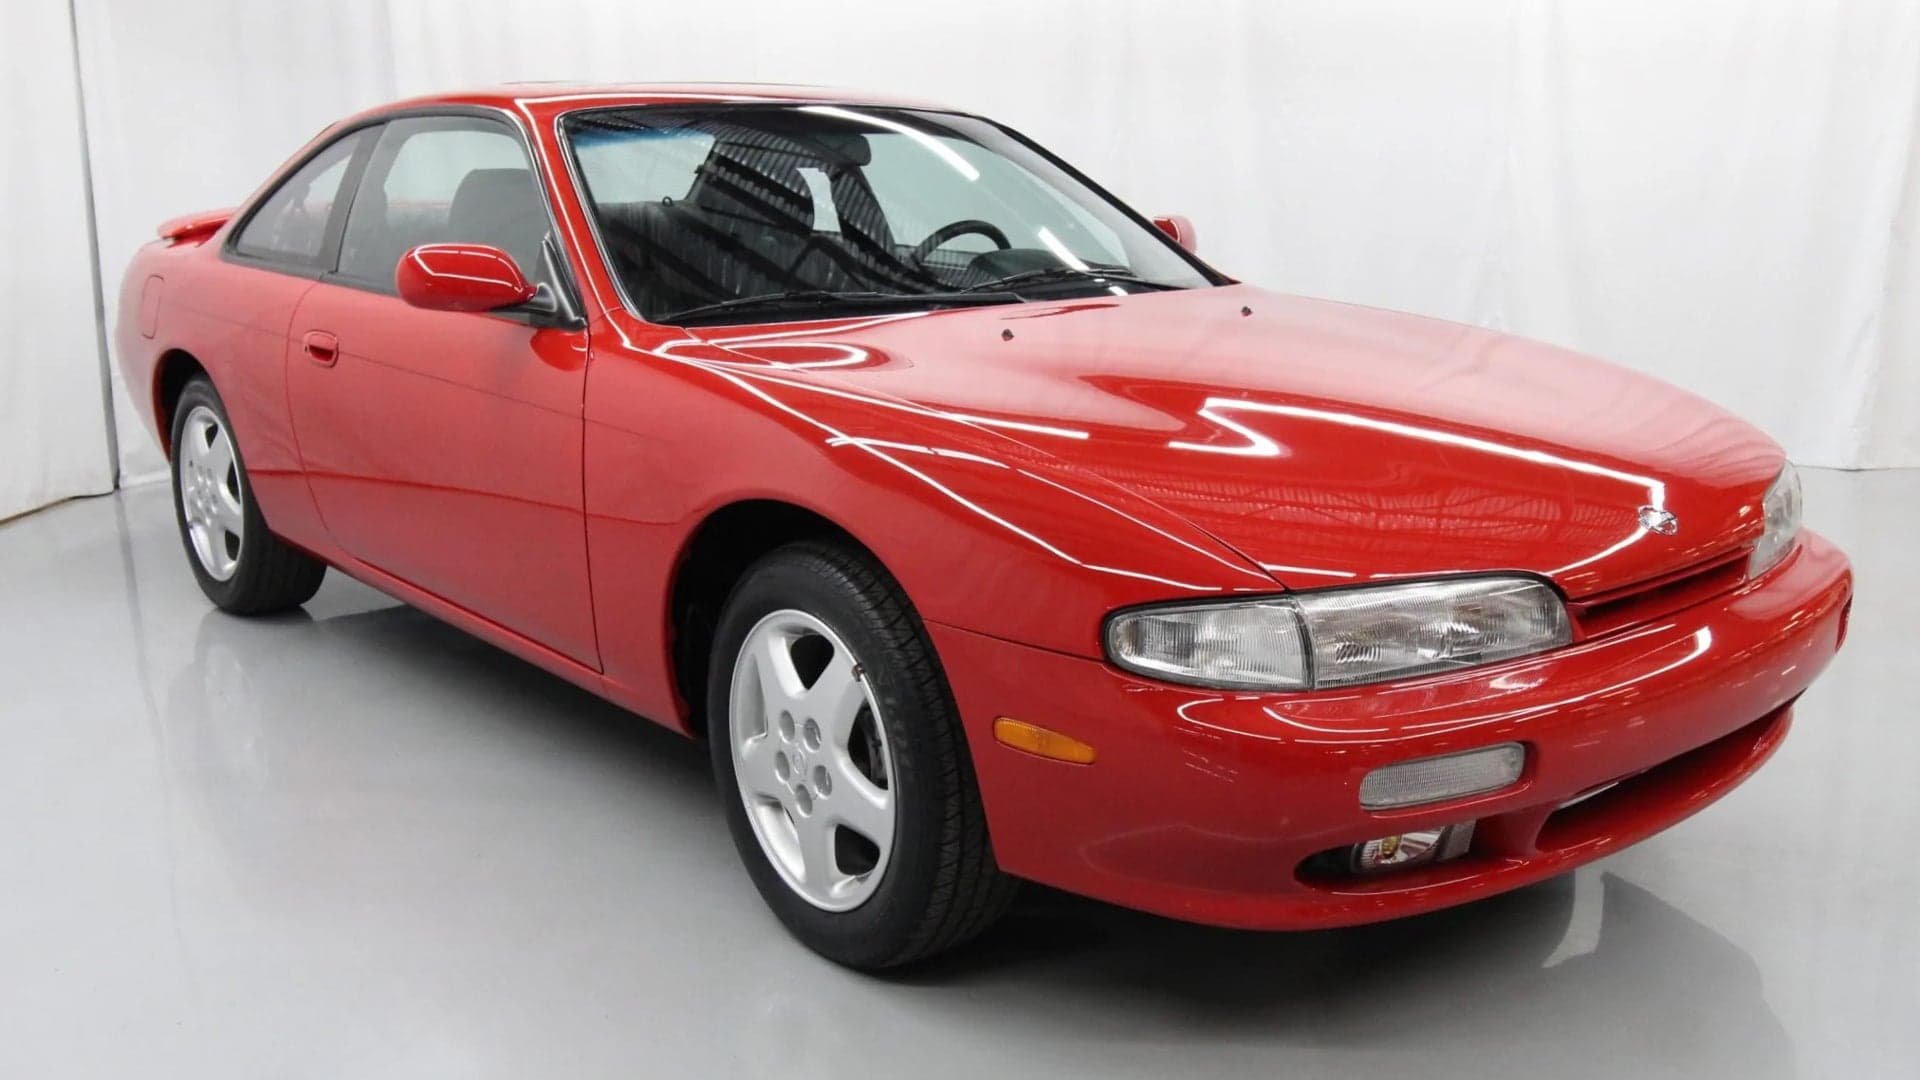 Bring A Trailer Auction Of 590-Mile S14 Goes South After Curious Commenters And Shill Bidding